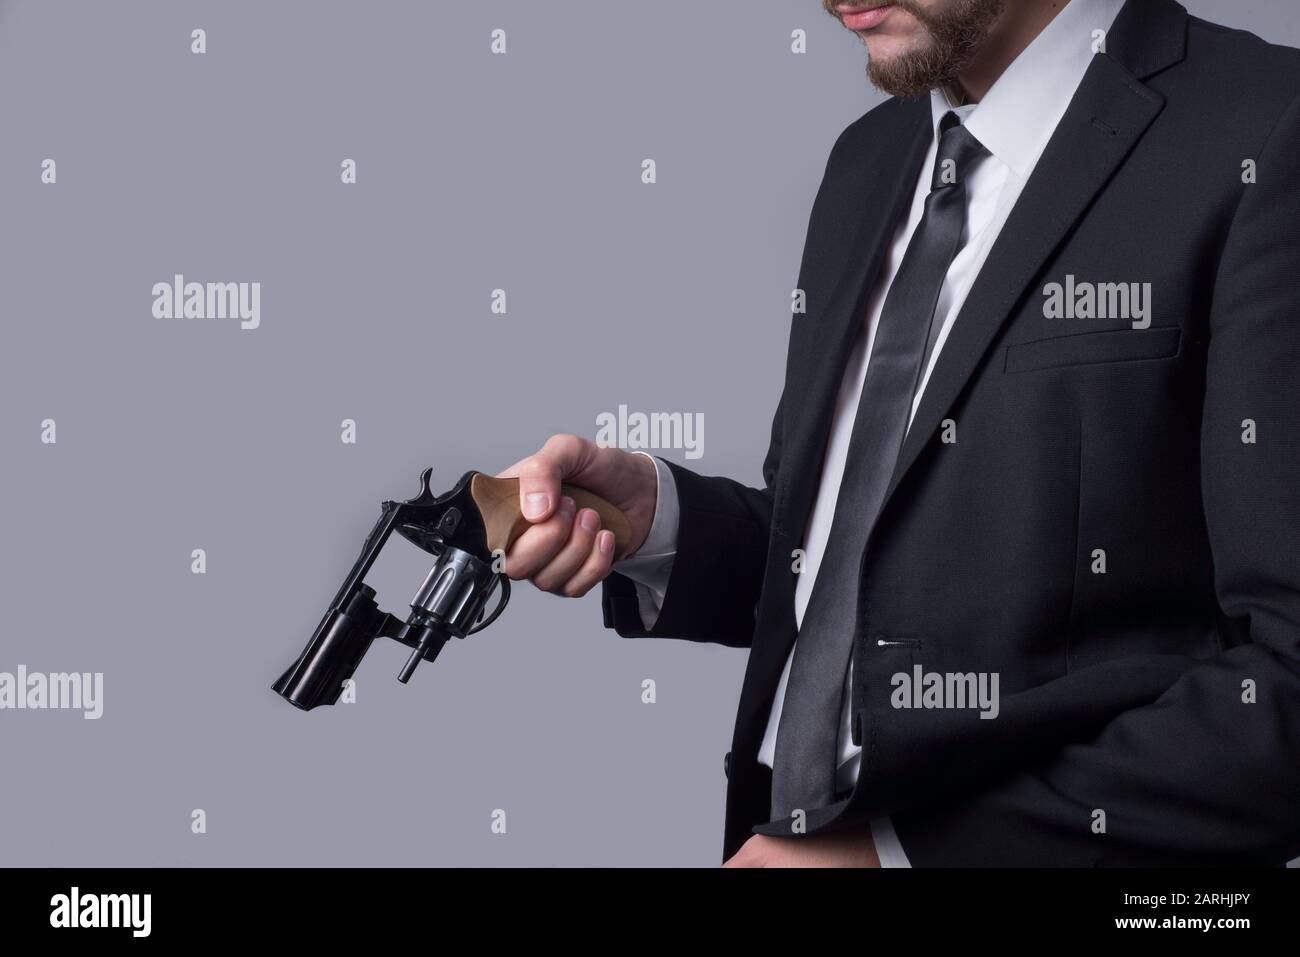 Portrait of a bearded man in a business suit holds a revolver in his hand, reloading it. On a gray background. Criminal type man, gangster, killer, bu Stock Photo